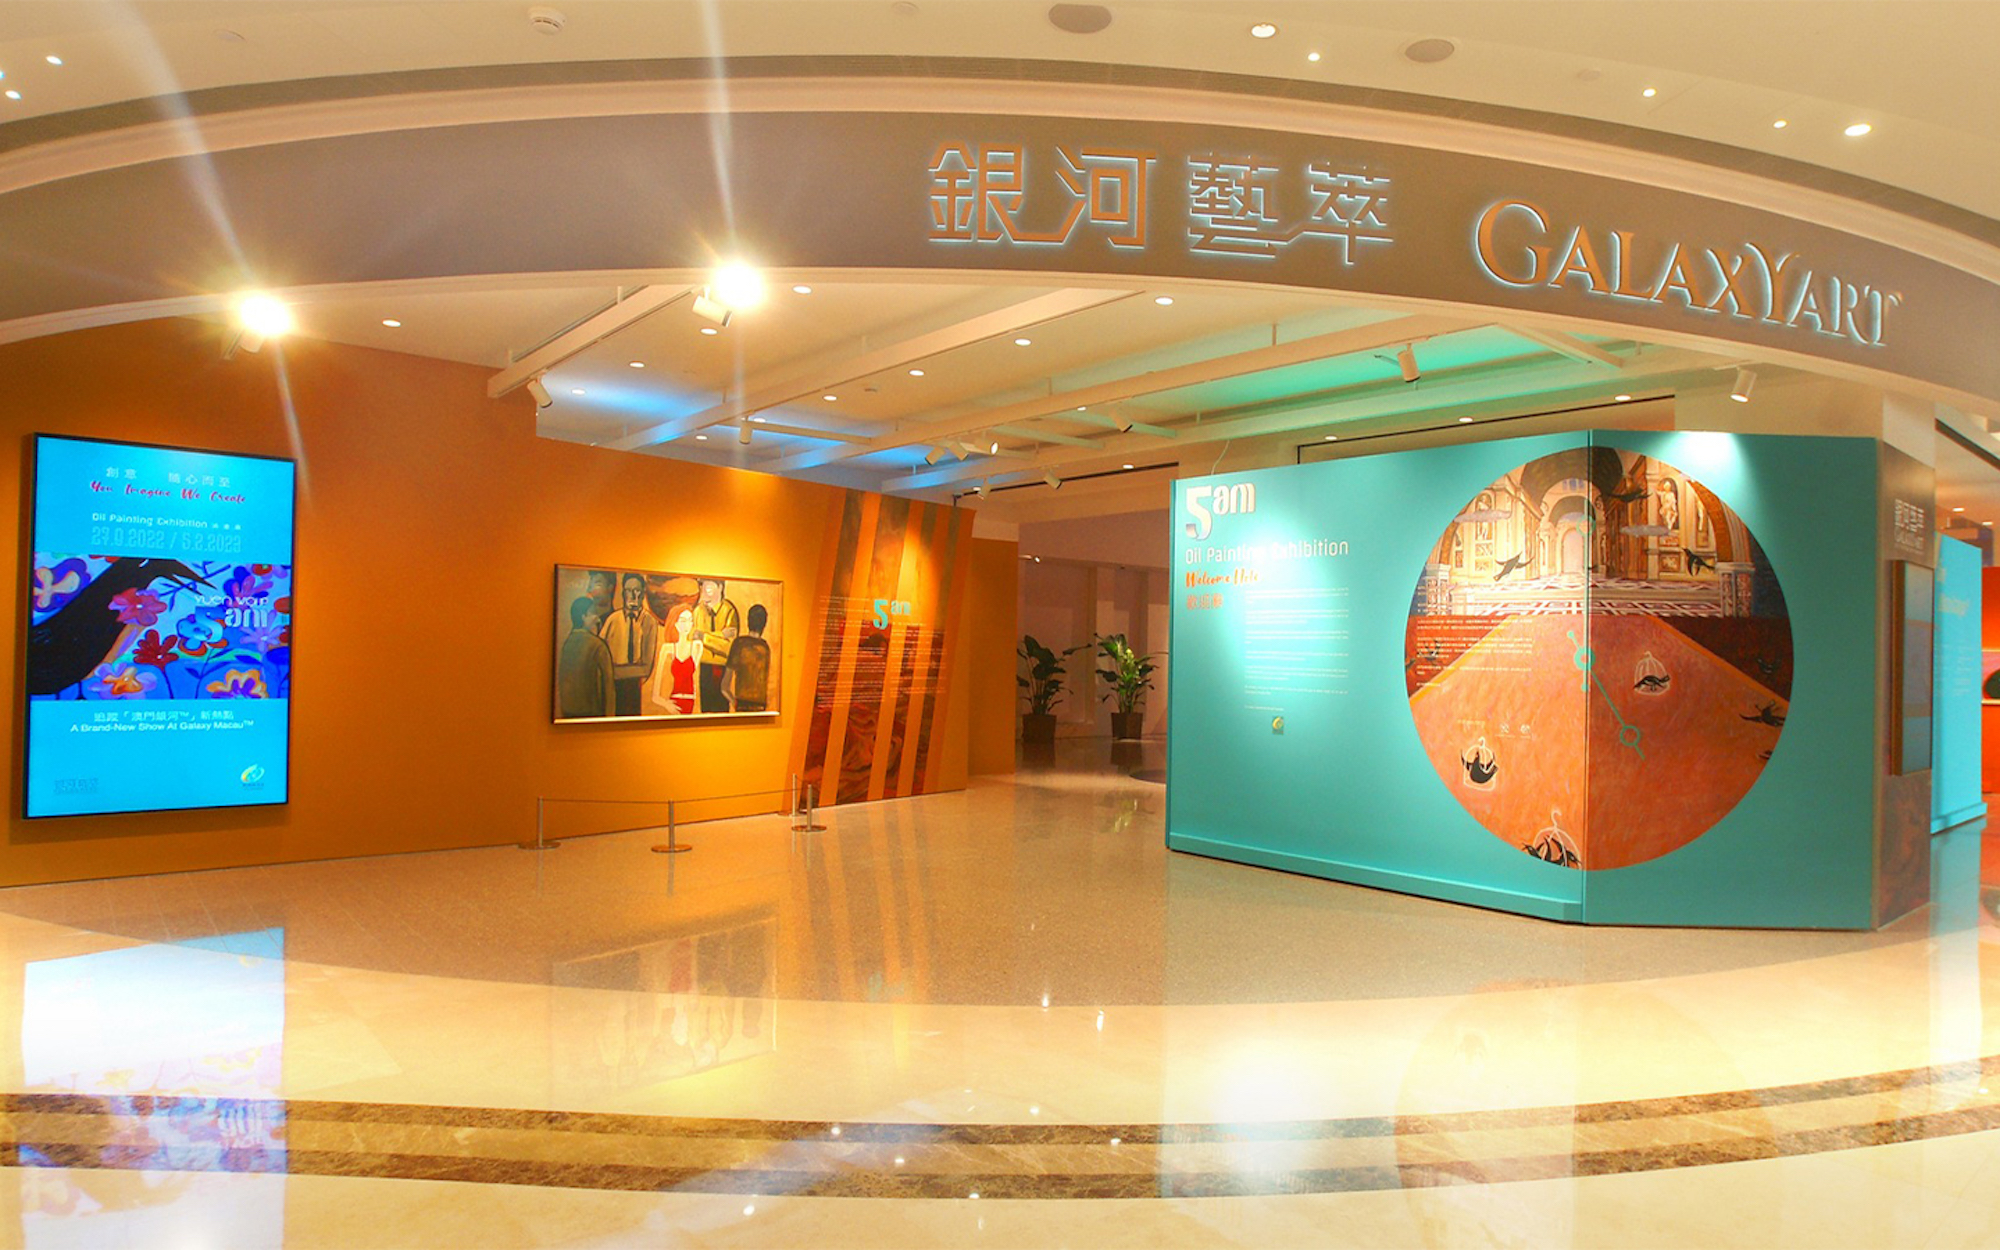 5 a.m. oil painting exhibition opens at GalaxyArt